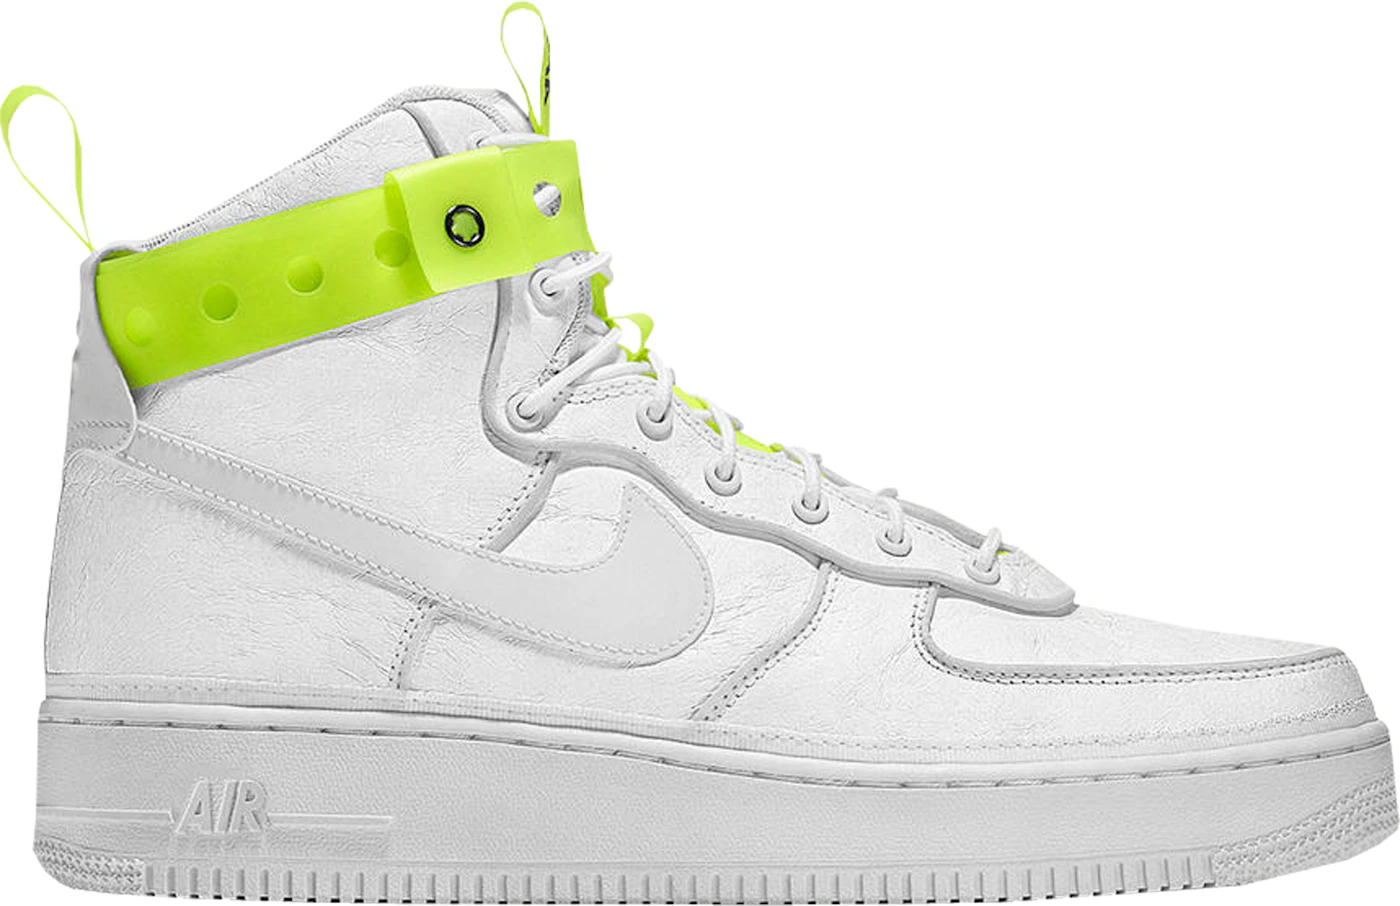 Special Field (SF) Air Force 1 - StockX News